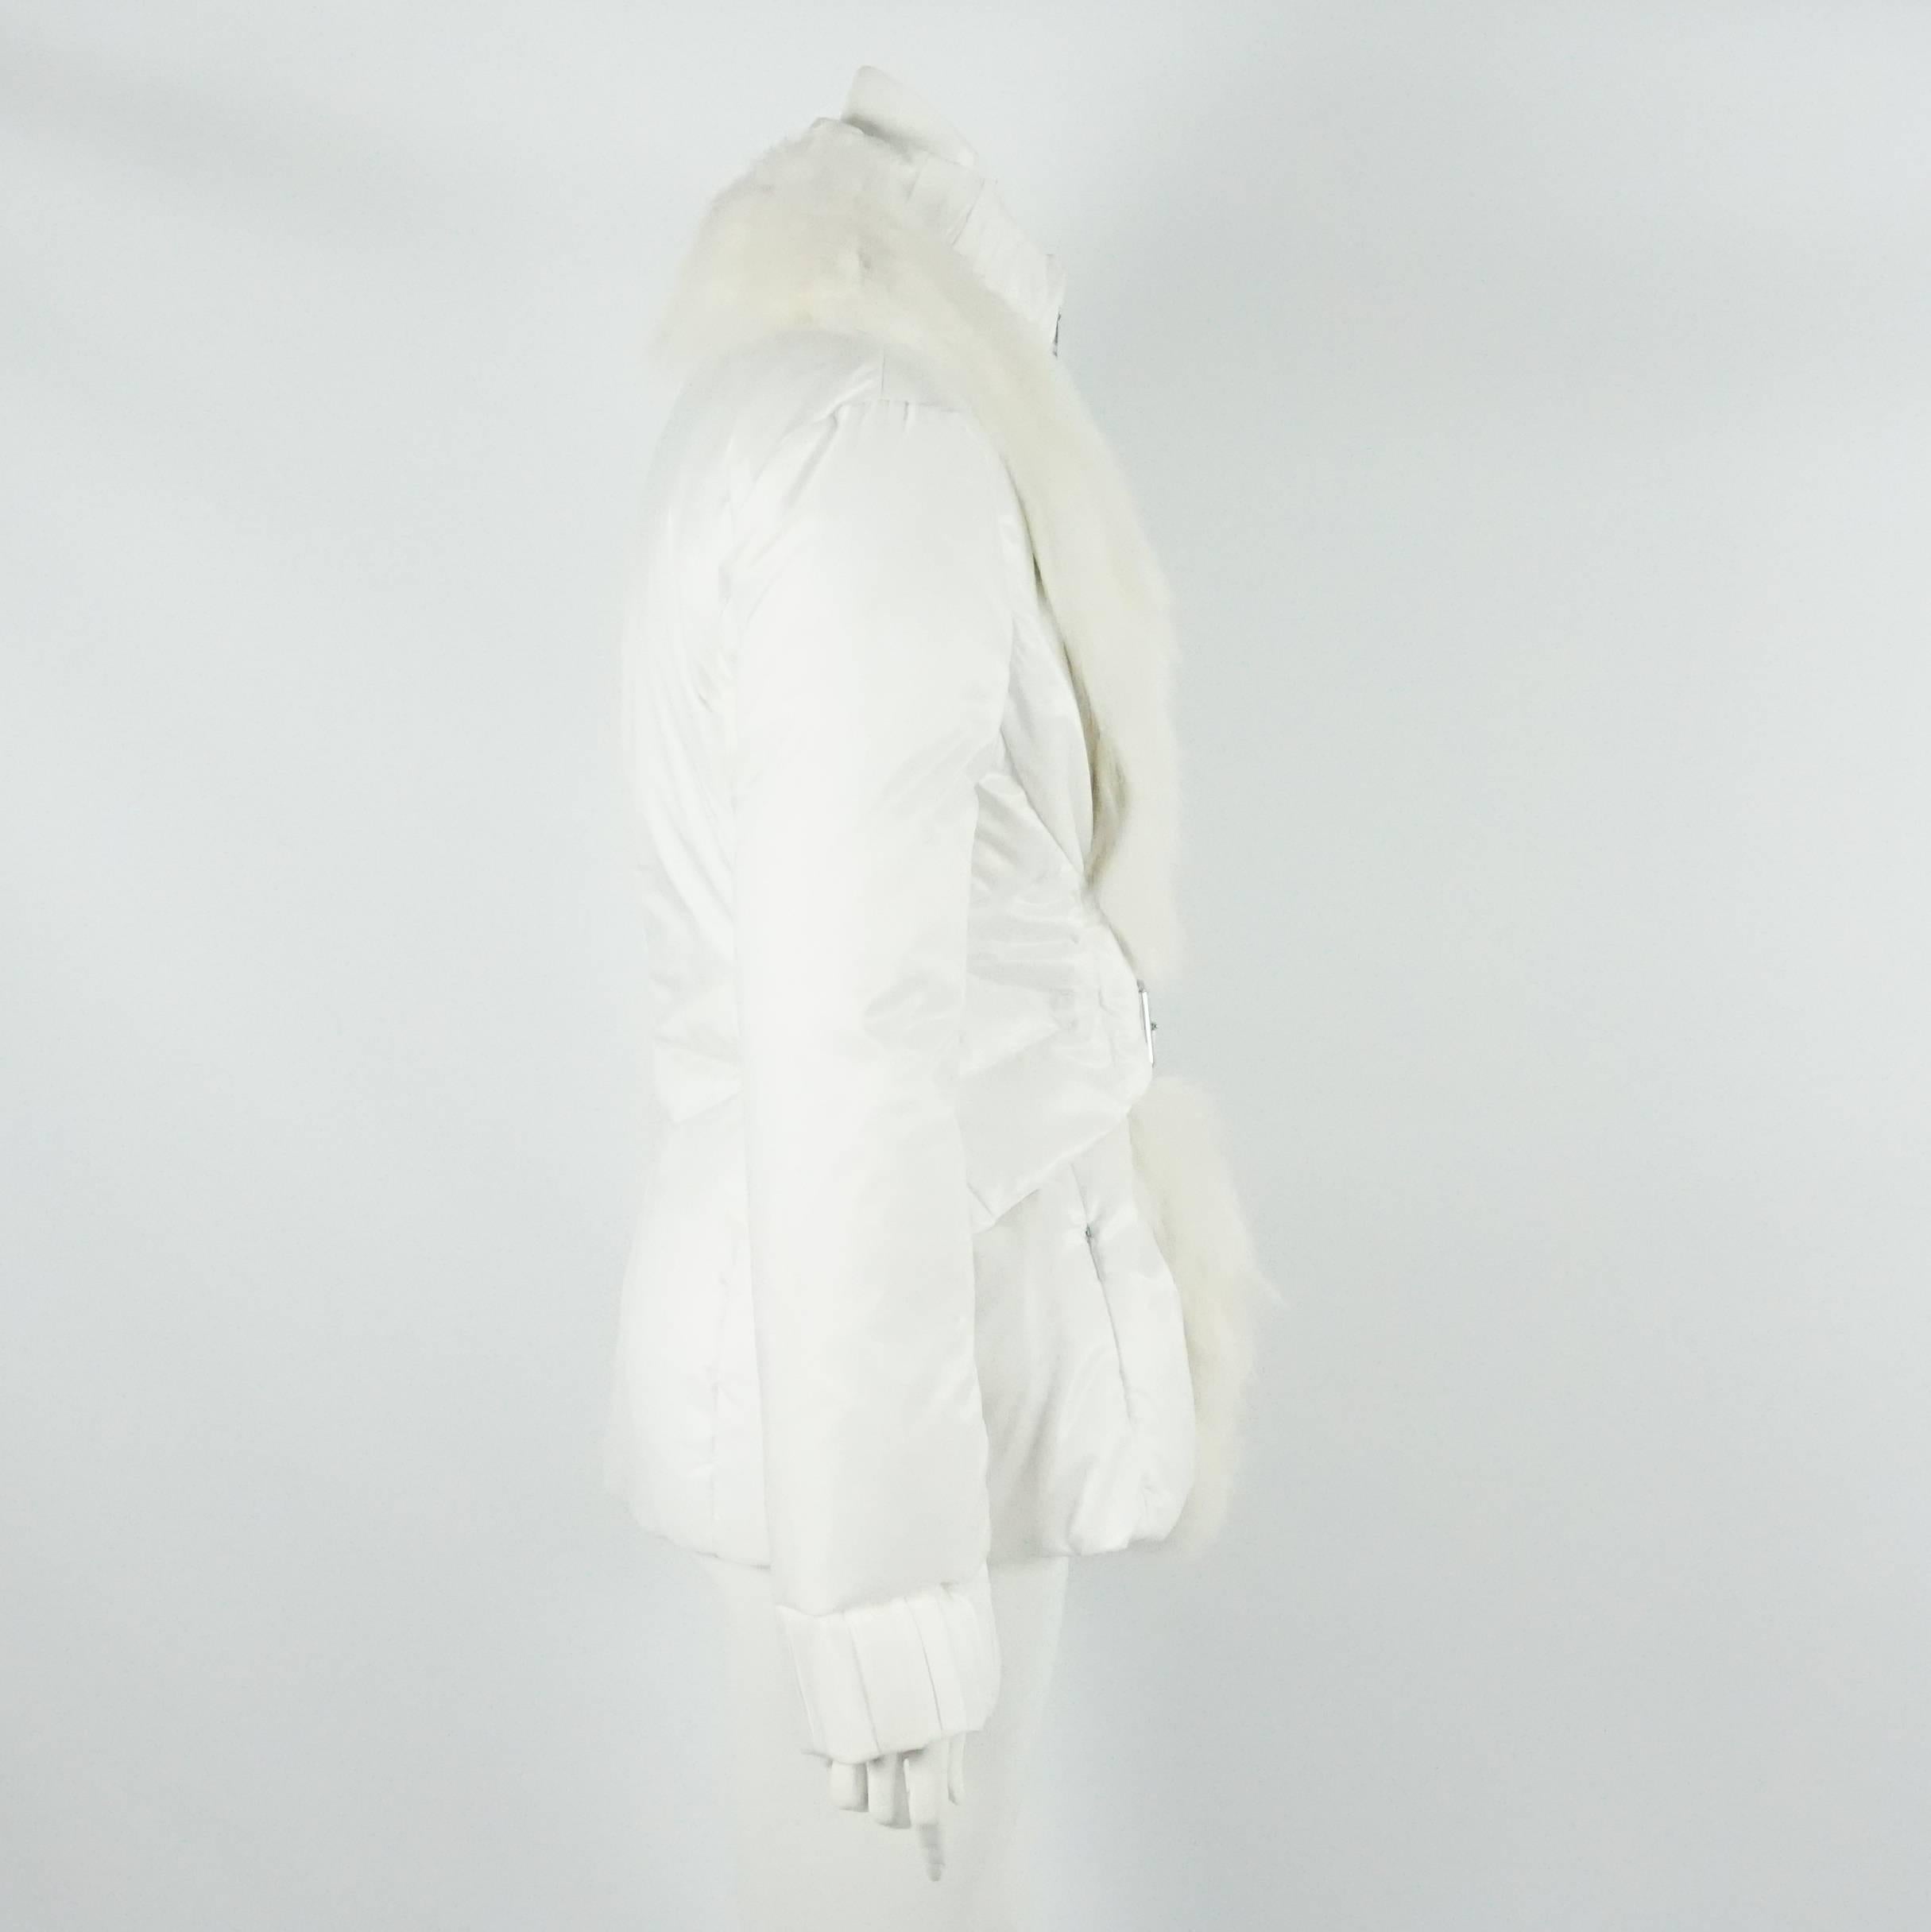 Roberto Cavalli White Puffer Jacket with Fox Fur Trim - 44. This puffer jacket is in excellent condition with light wear to the fabric. It has a fitted shape and features fox along the collar and front, a silver front zipper, a small belt in the